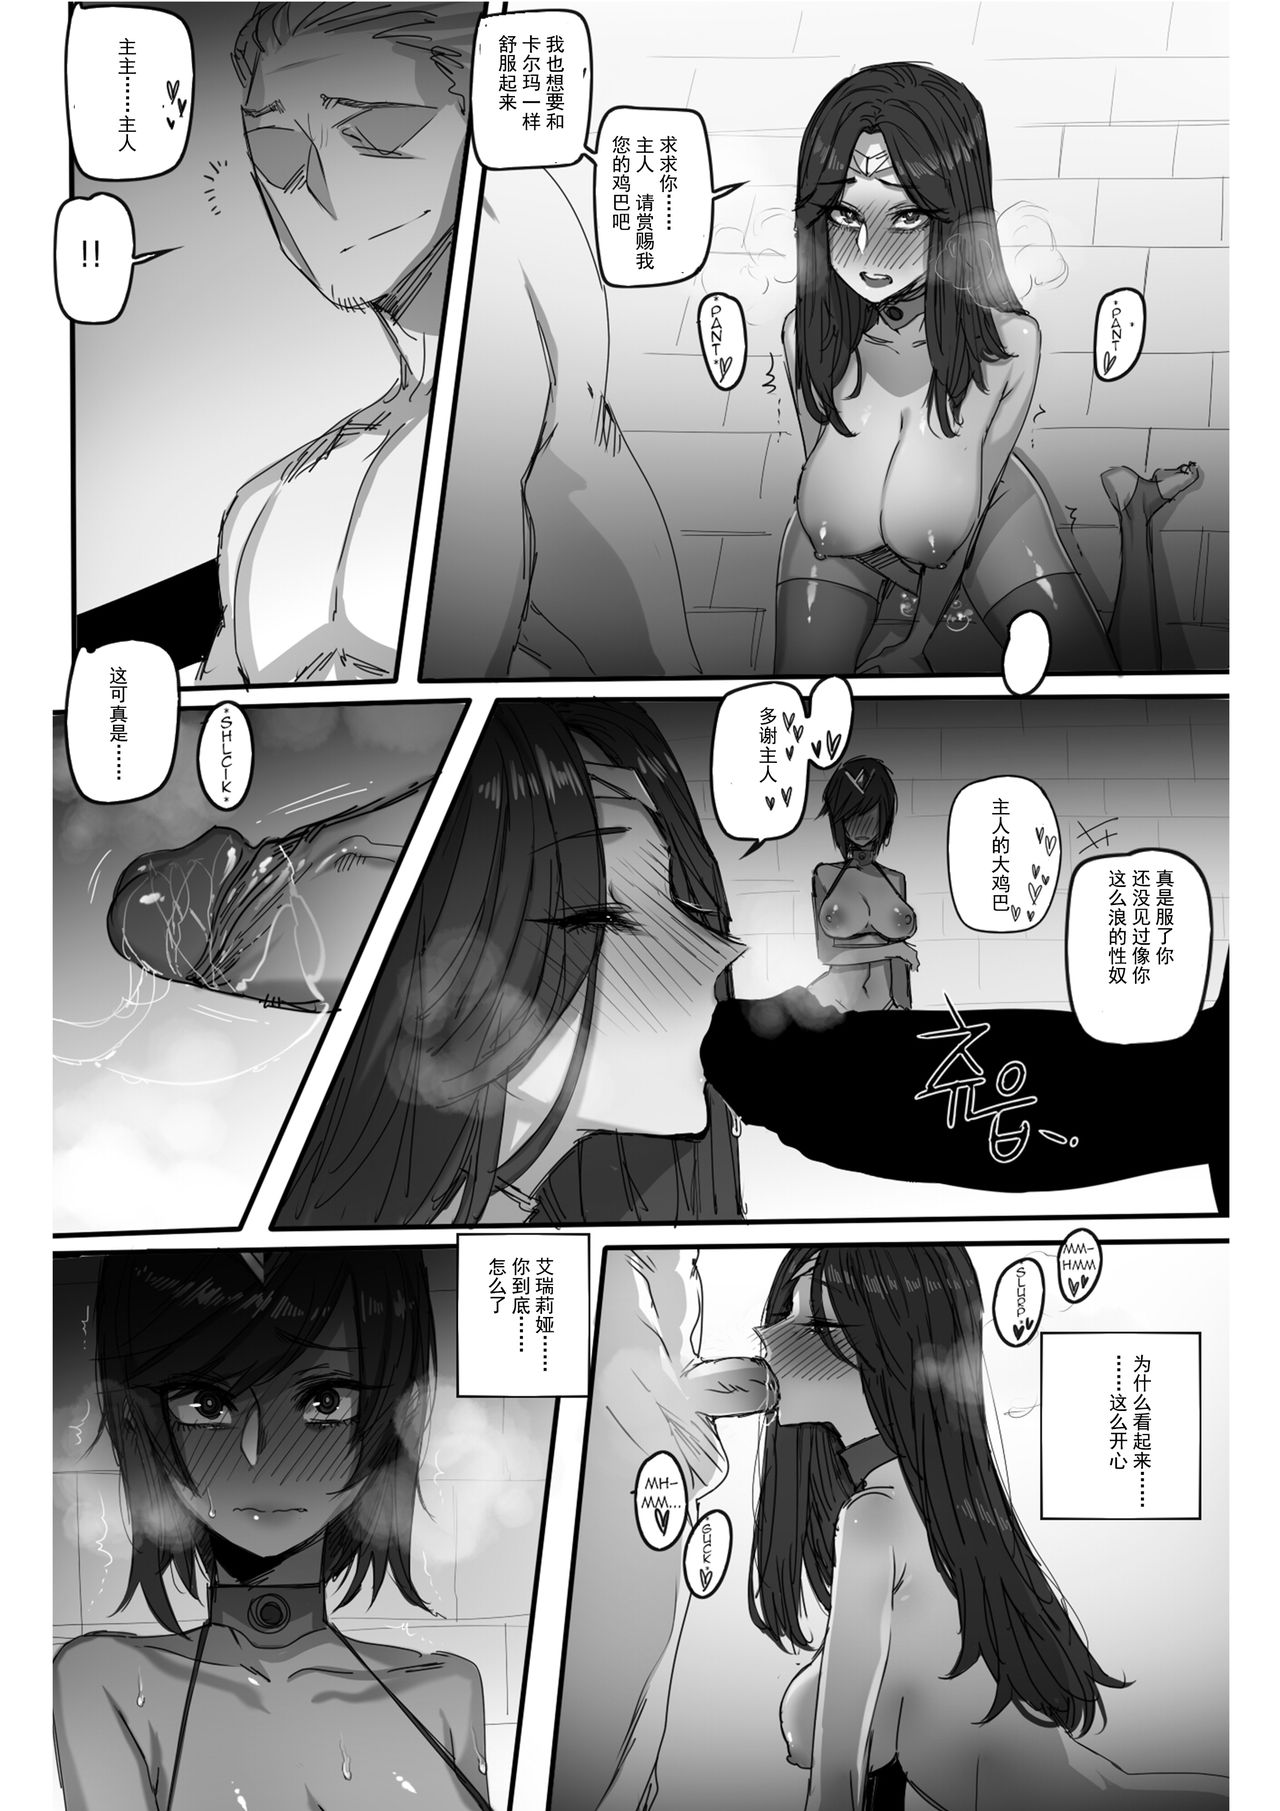 [ratatatat74] For the Noxus (League of Legends) [Chinese][挽歌个人汉化] [ratatatat74] For the Noxus (リーグ・オブ・レジェンズ) [中国翻訳]